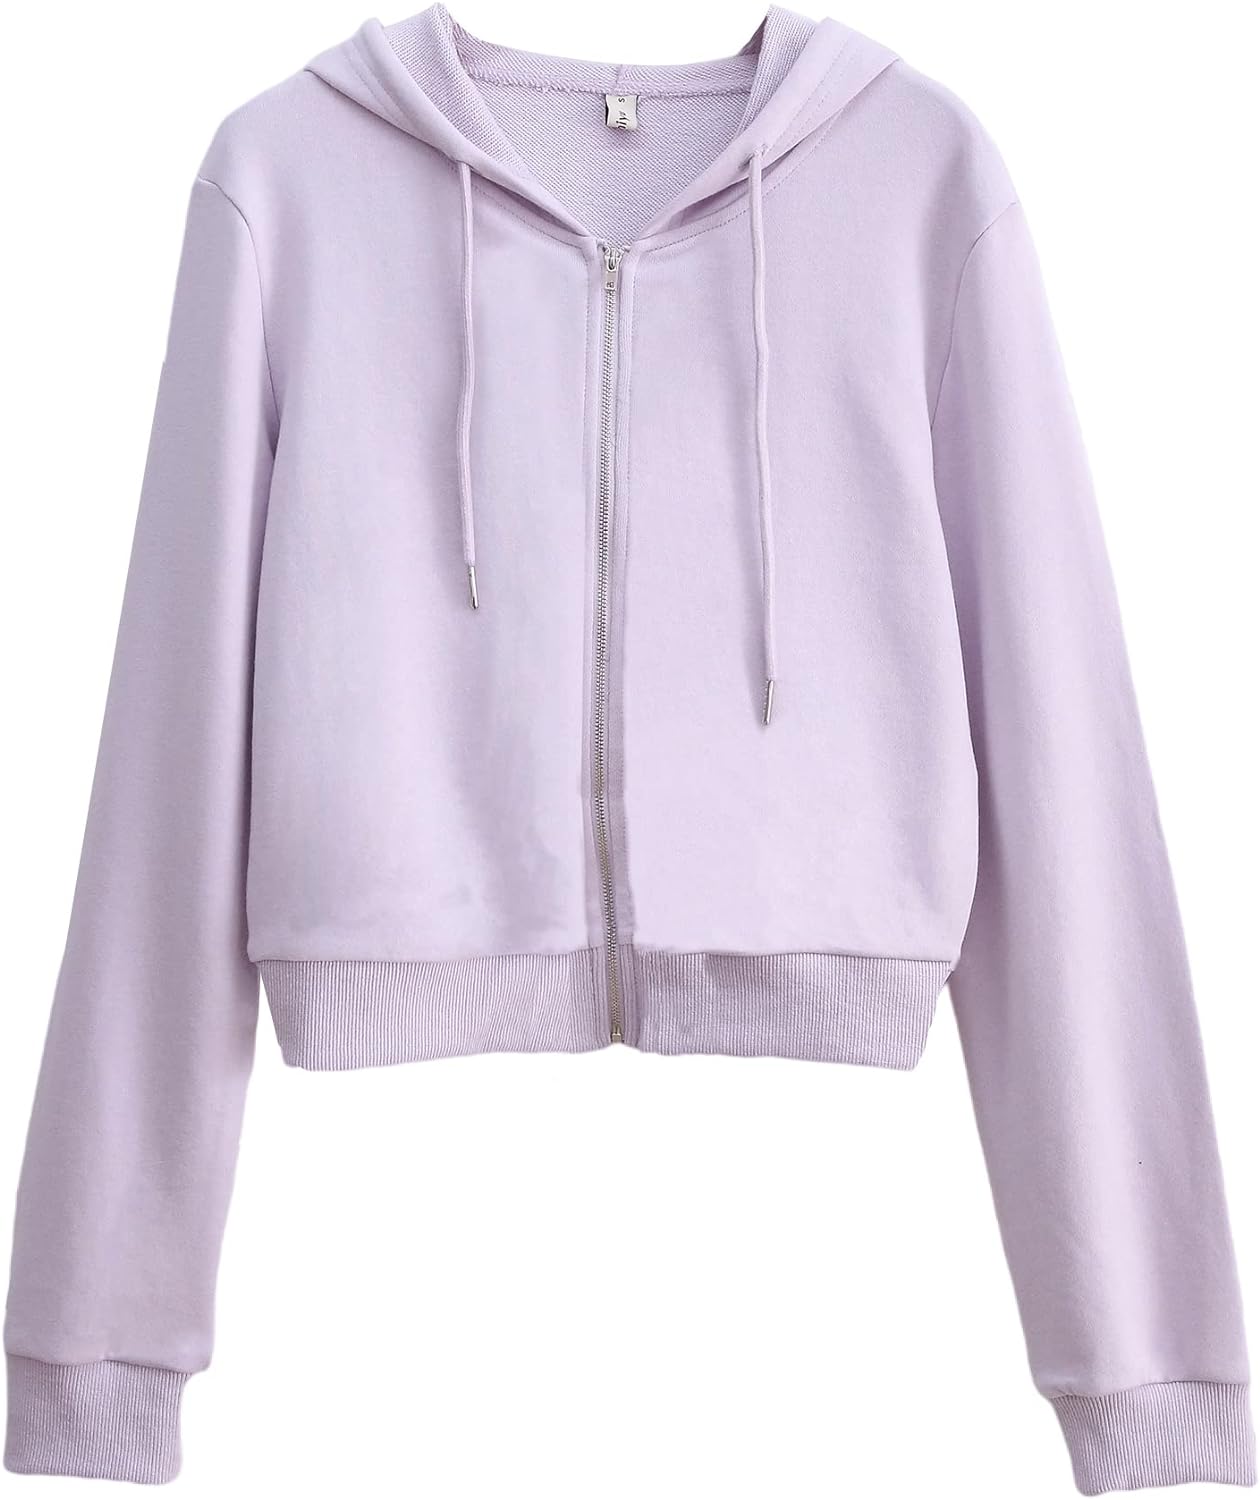 NTG Fad Languid Lavender / X-Large Women's Cropped Zip up Hoodie with Drawstring Hooded